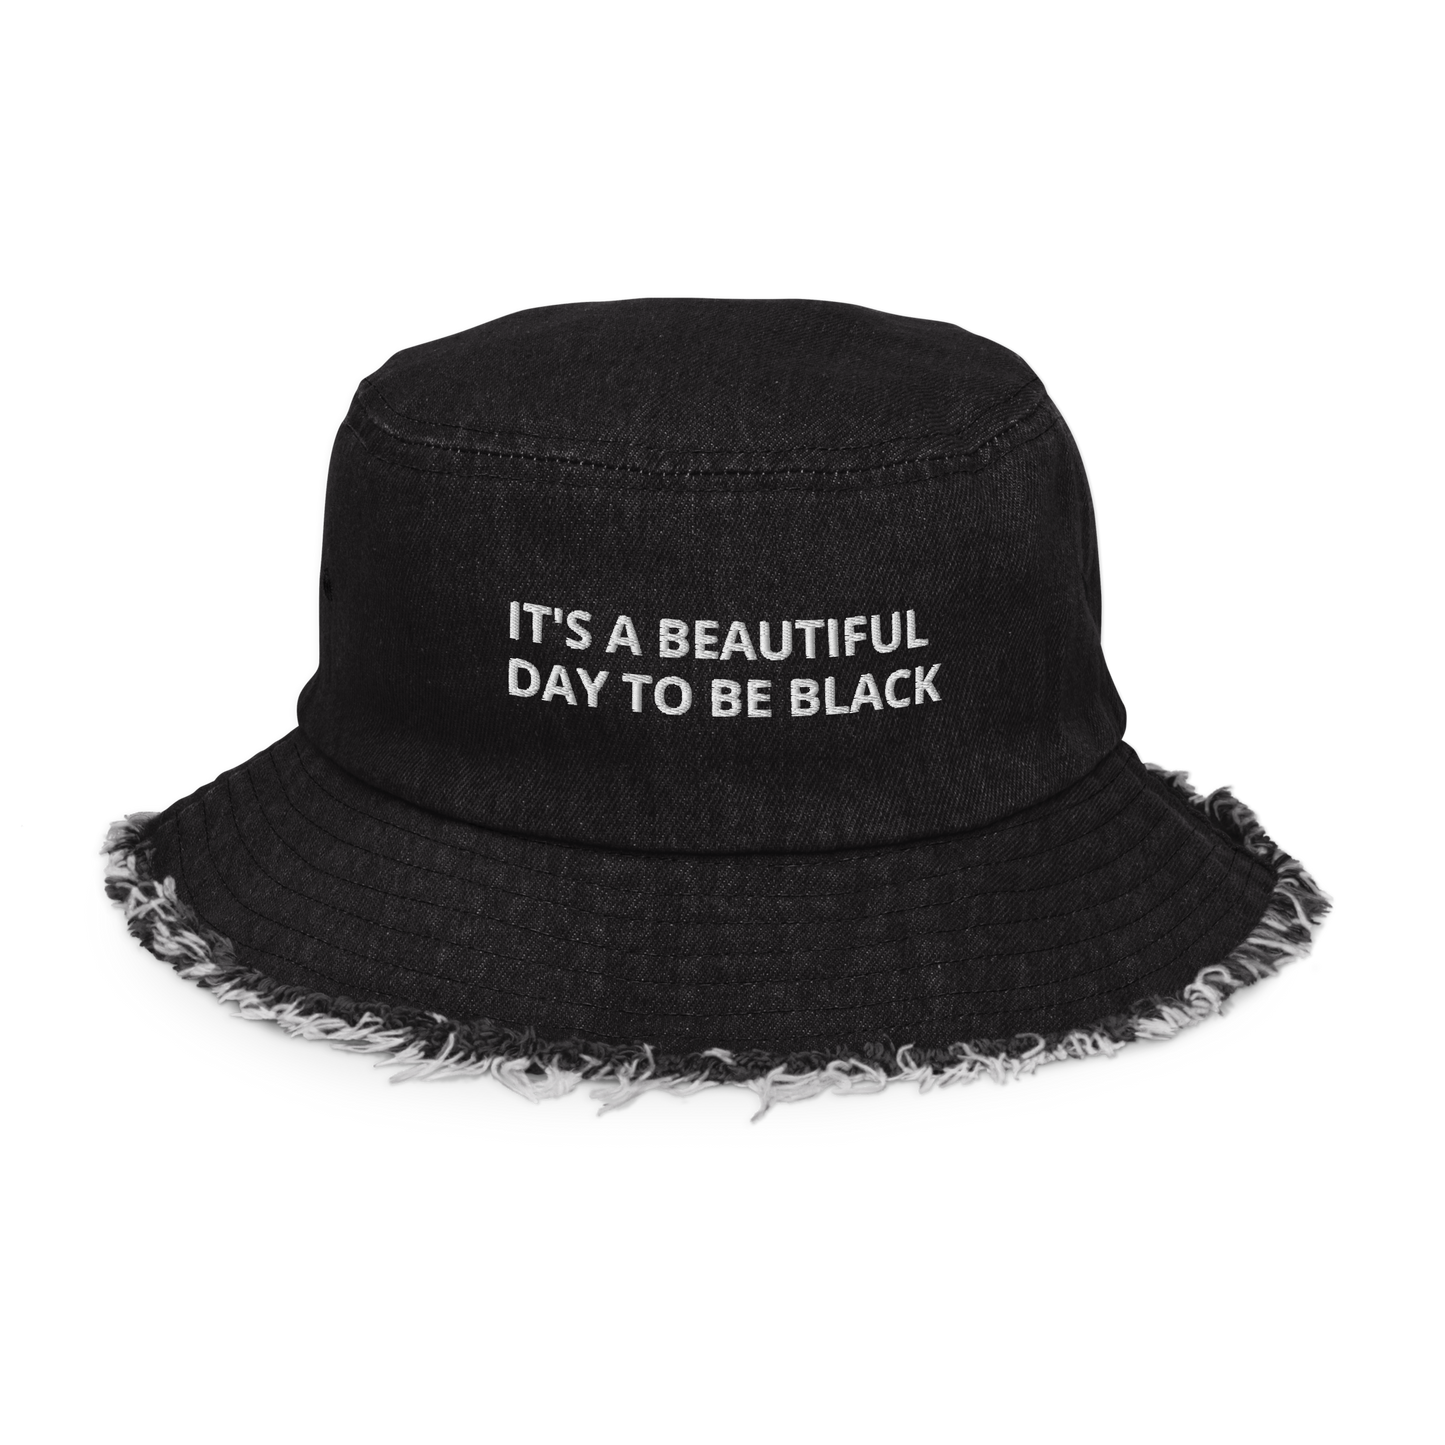 It's A Beautiful Day To Be Black Distressed Denim Bucket Hat